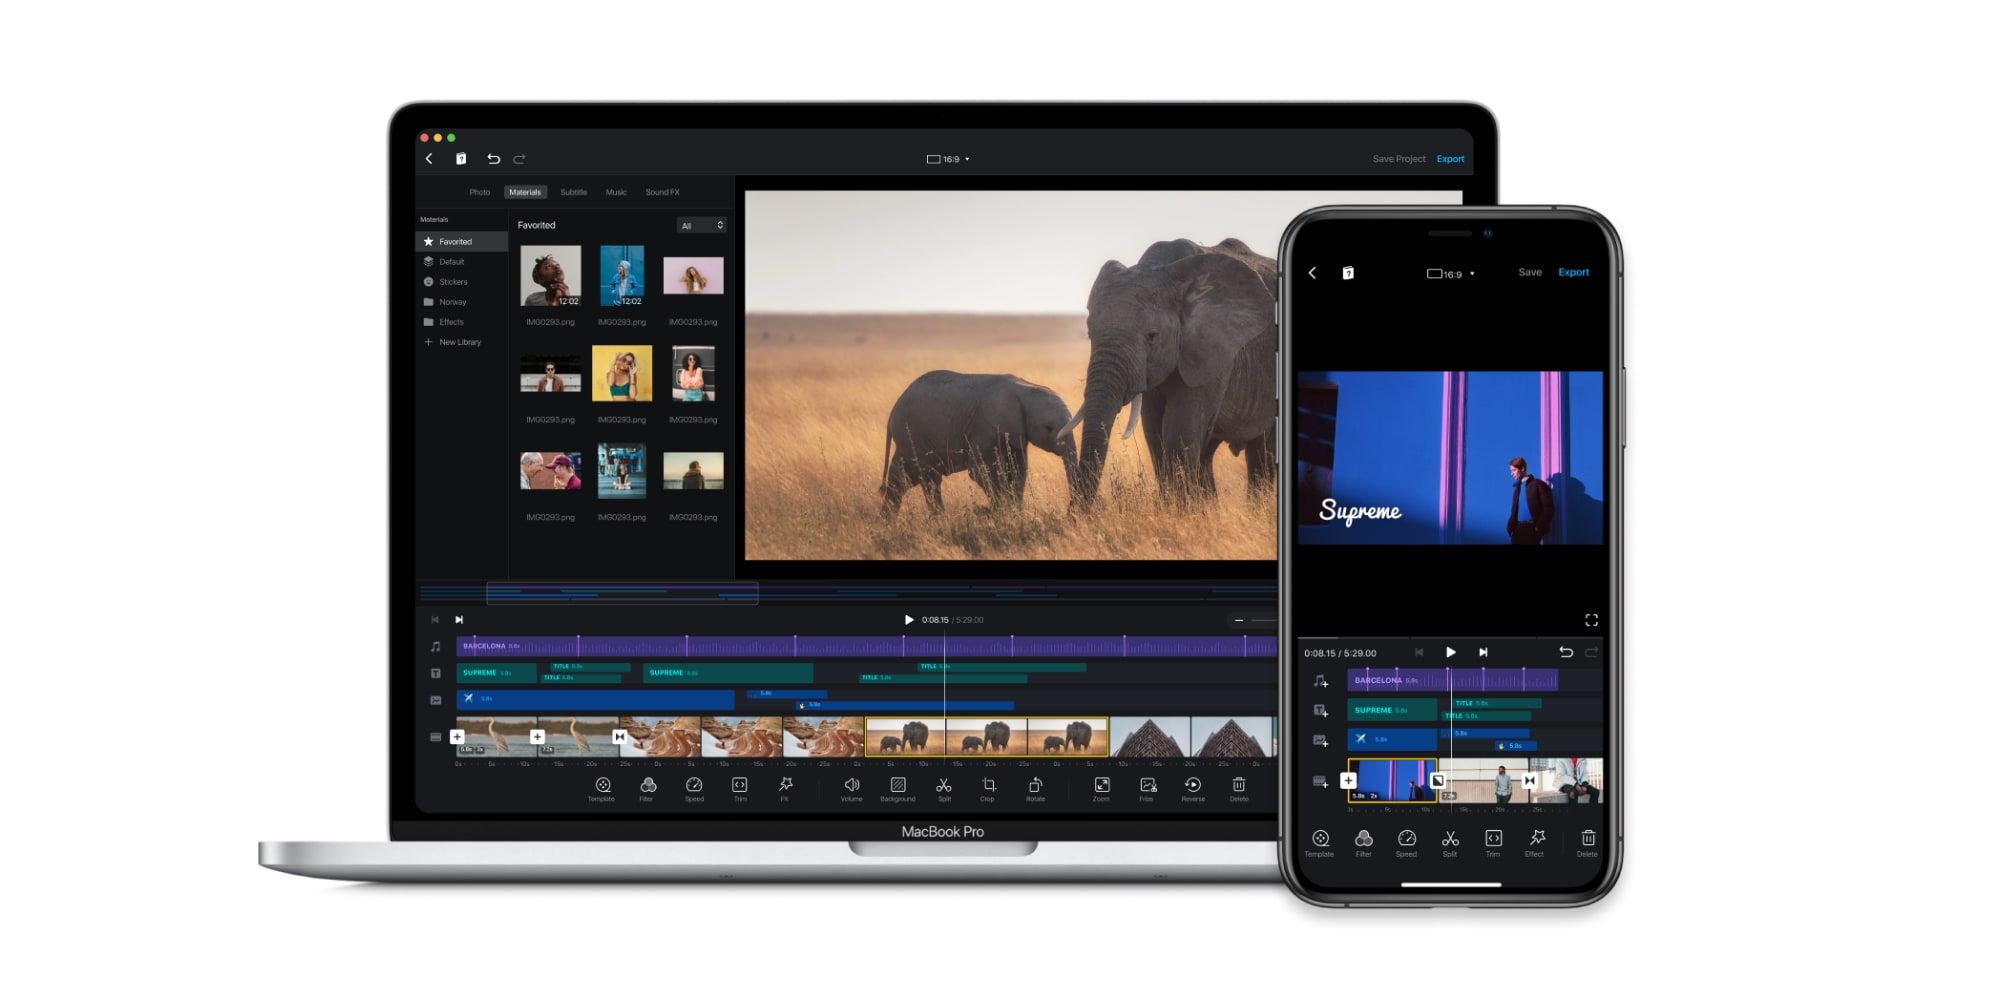 download the last version for iphoneHitPaw Video Editor